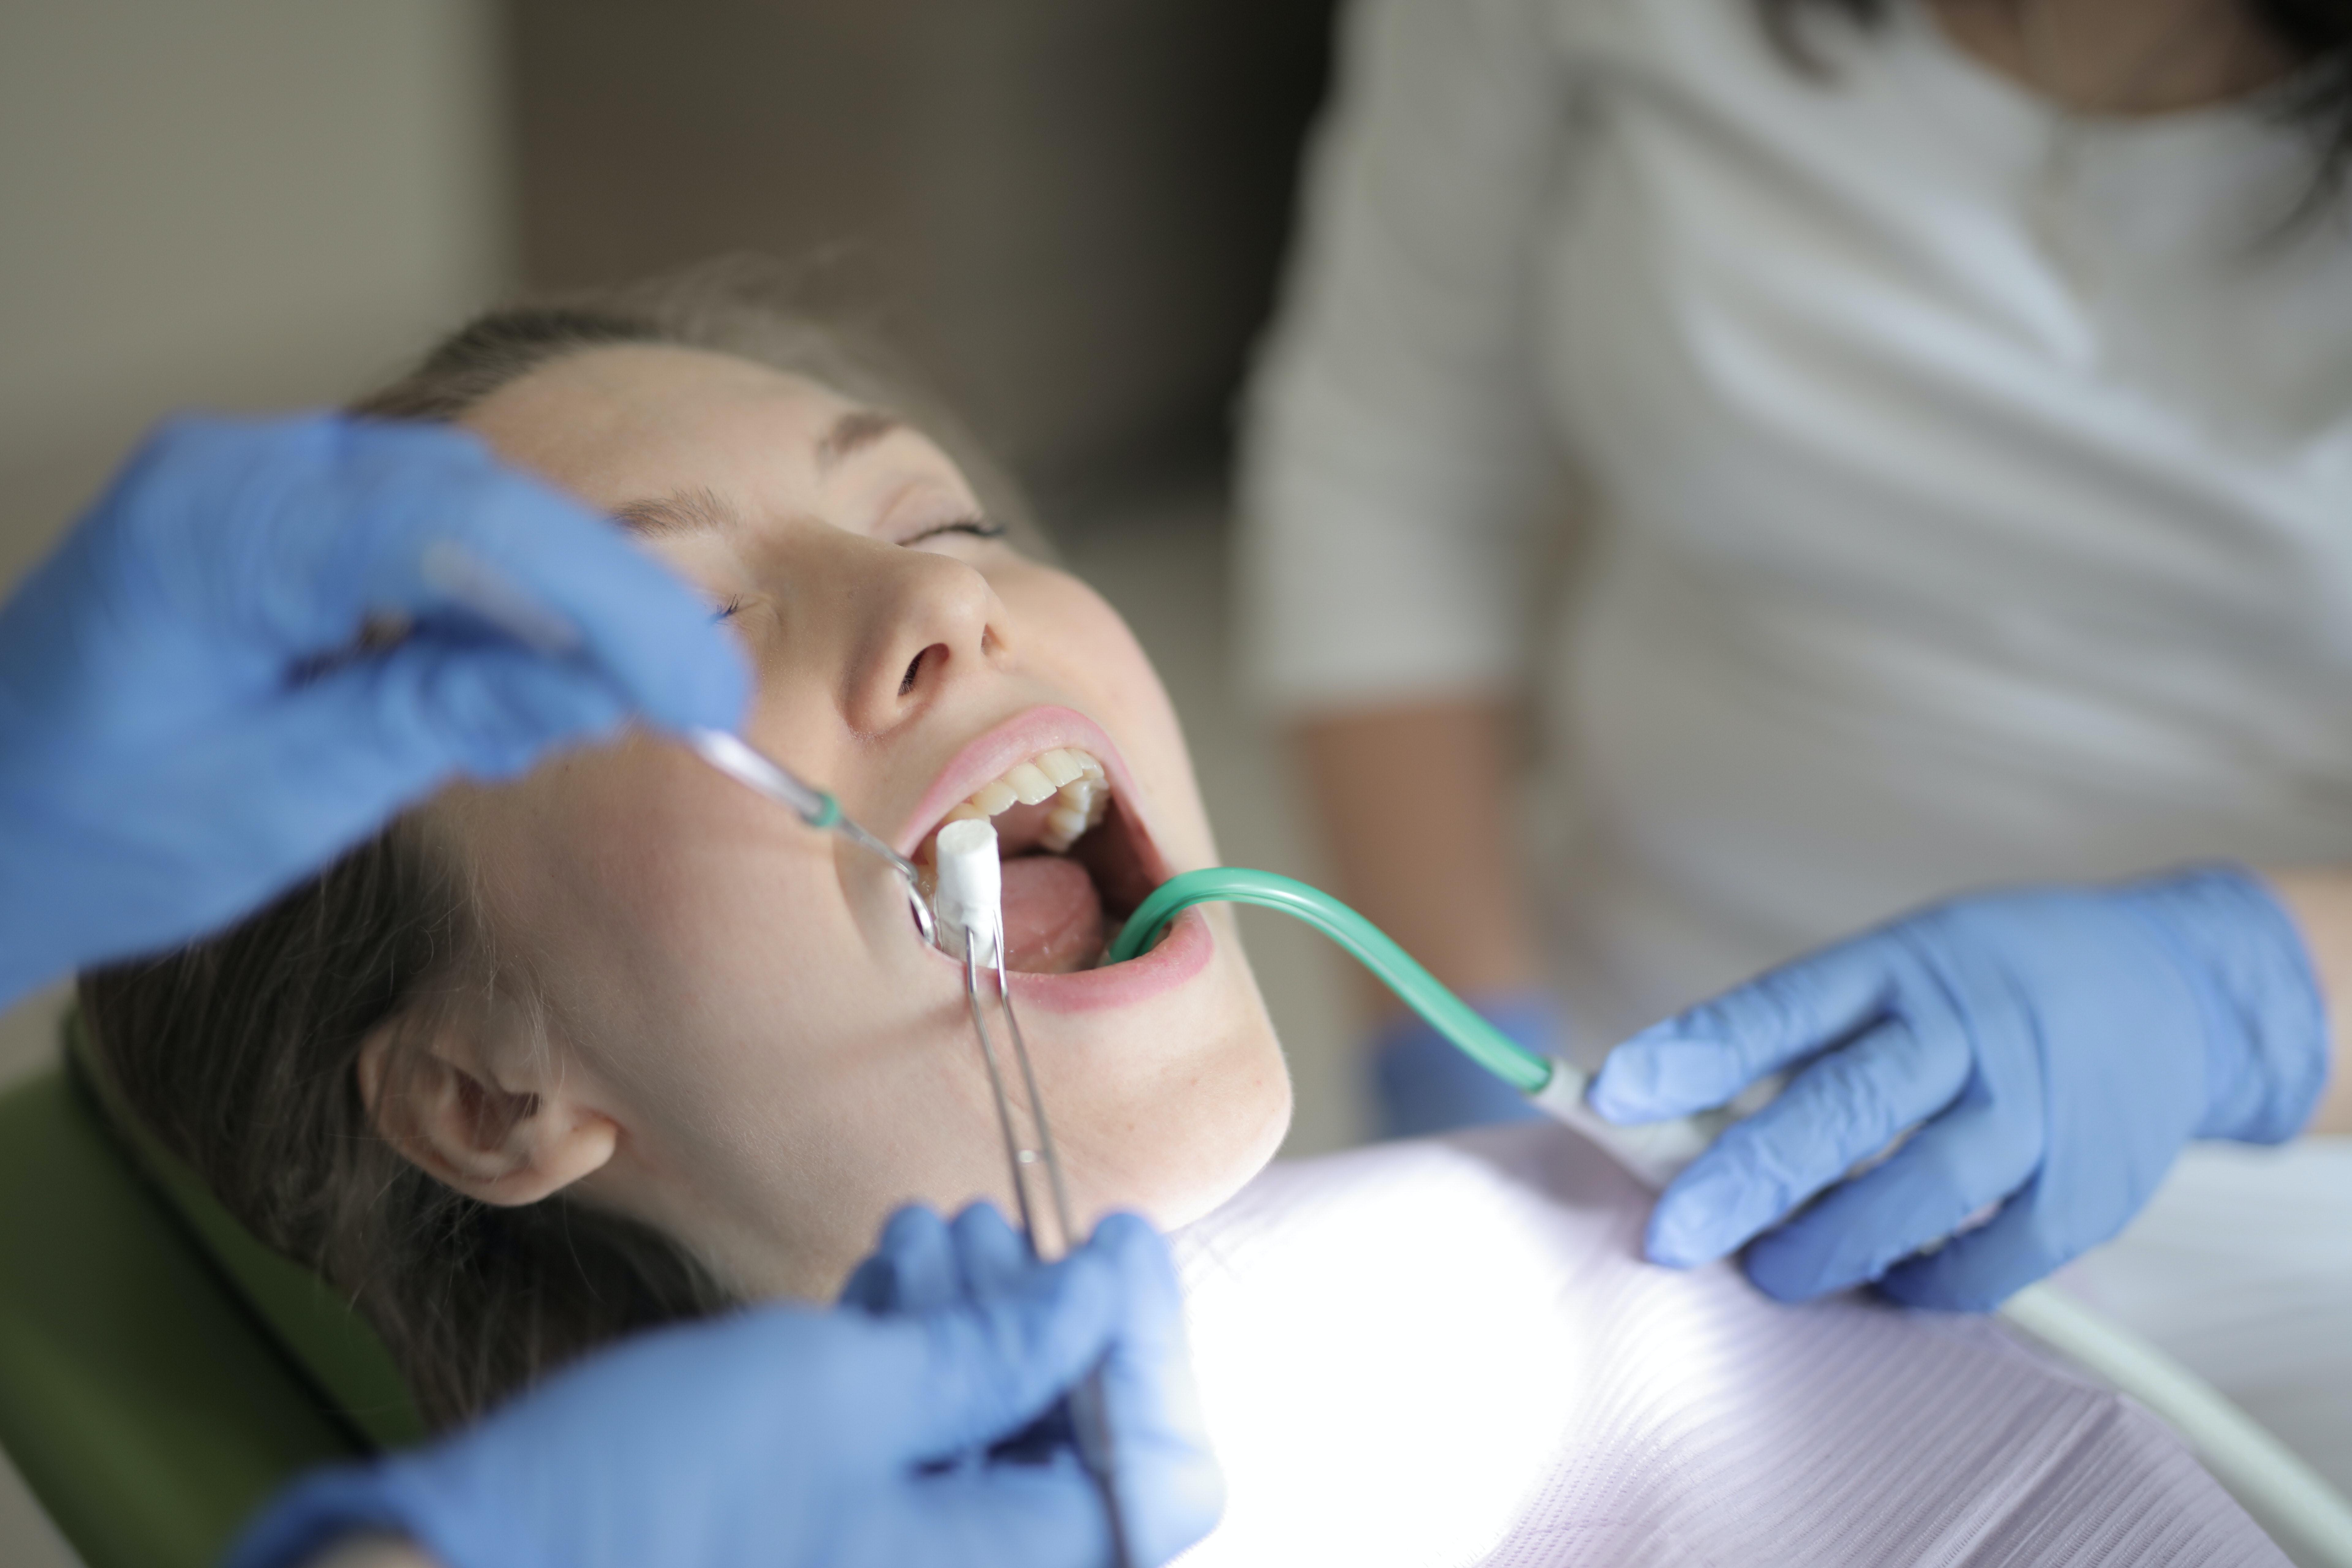 Can a dentist become a medical doctor? 